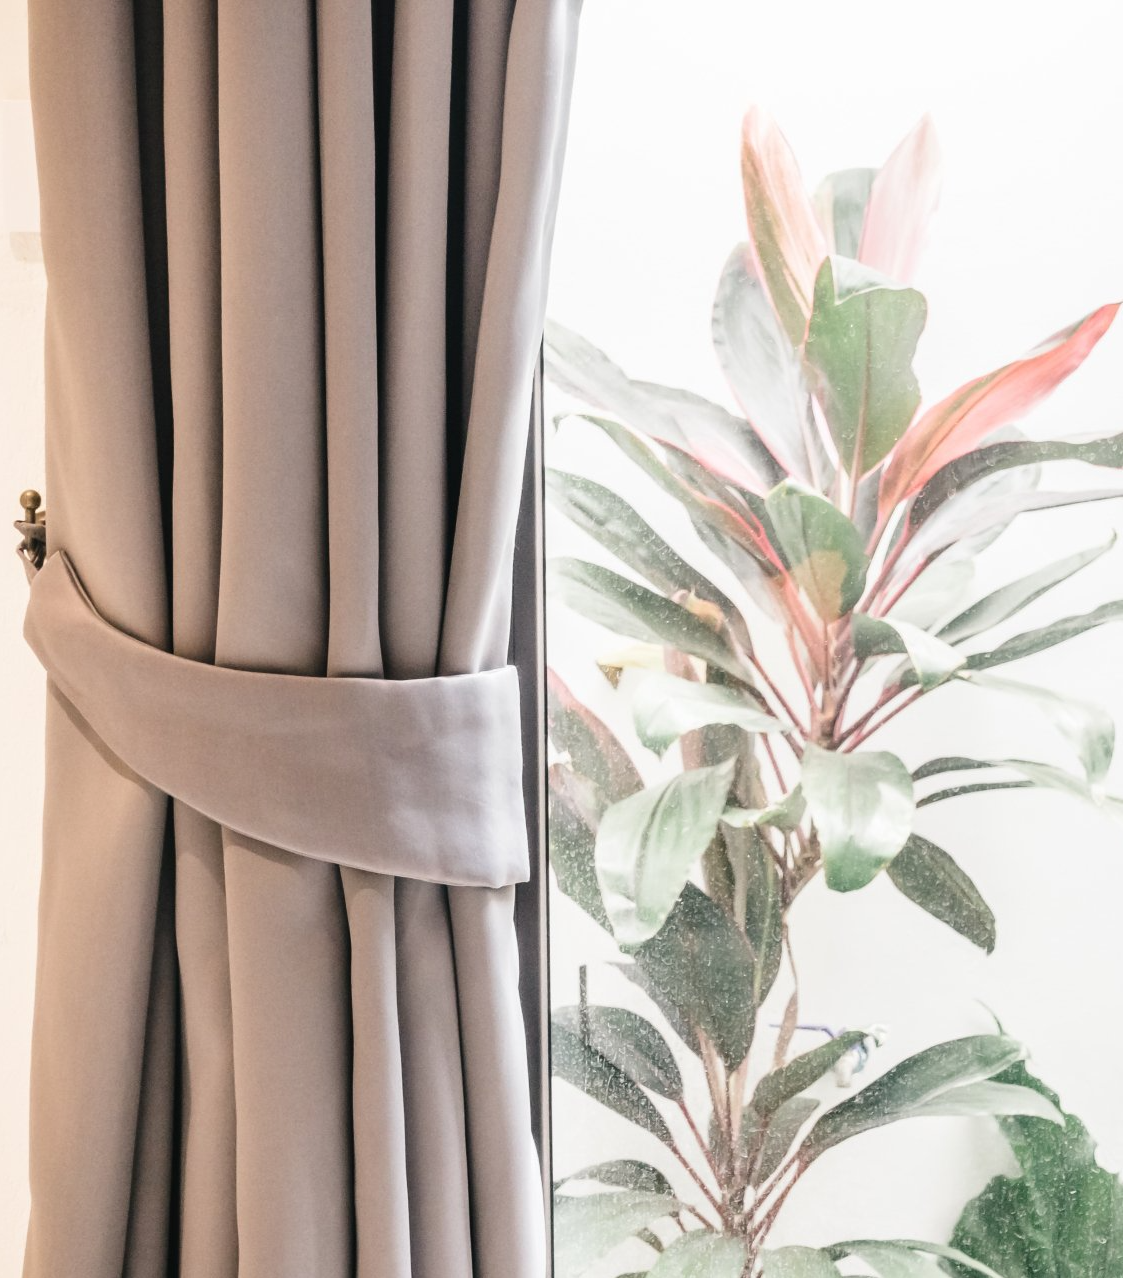 Pink coloured formal curtain, tied back, showing pink and green plant outside window.